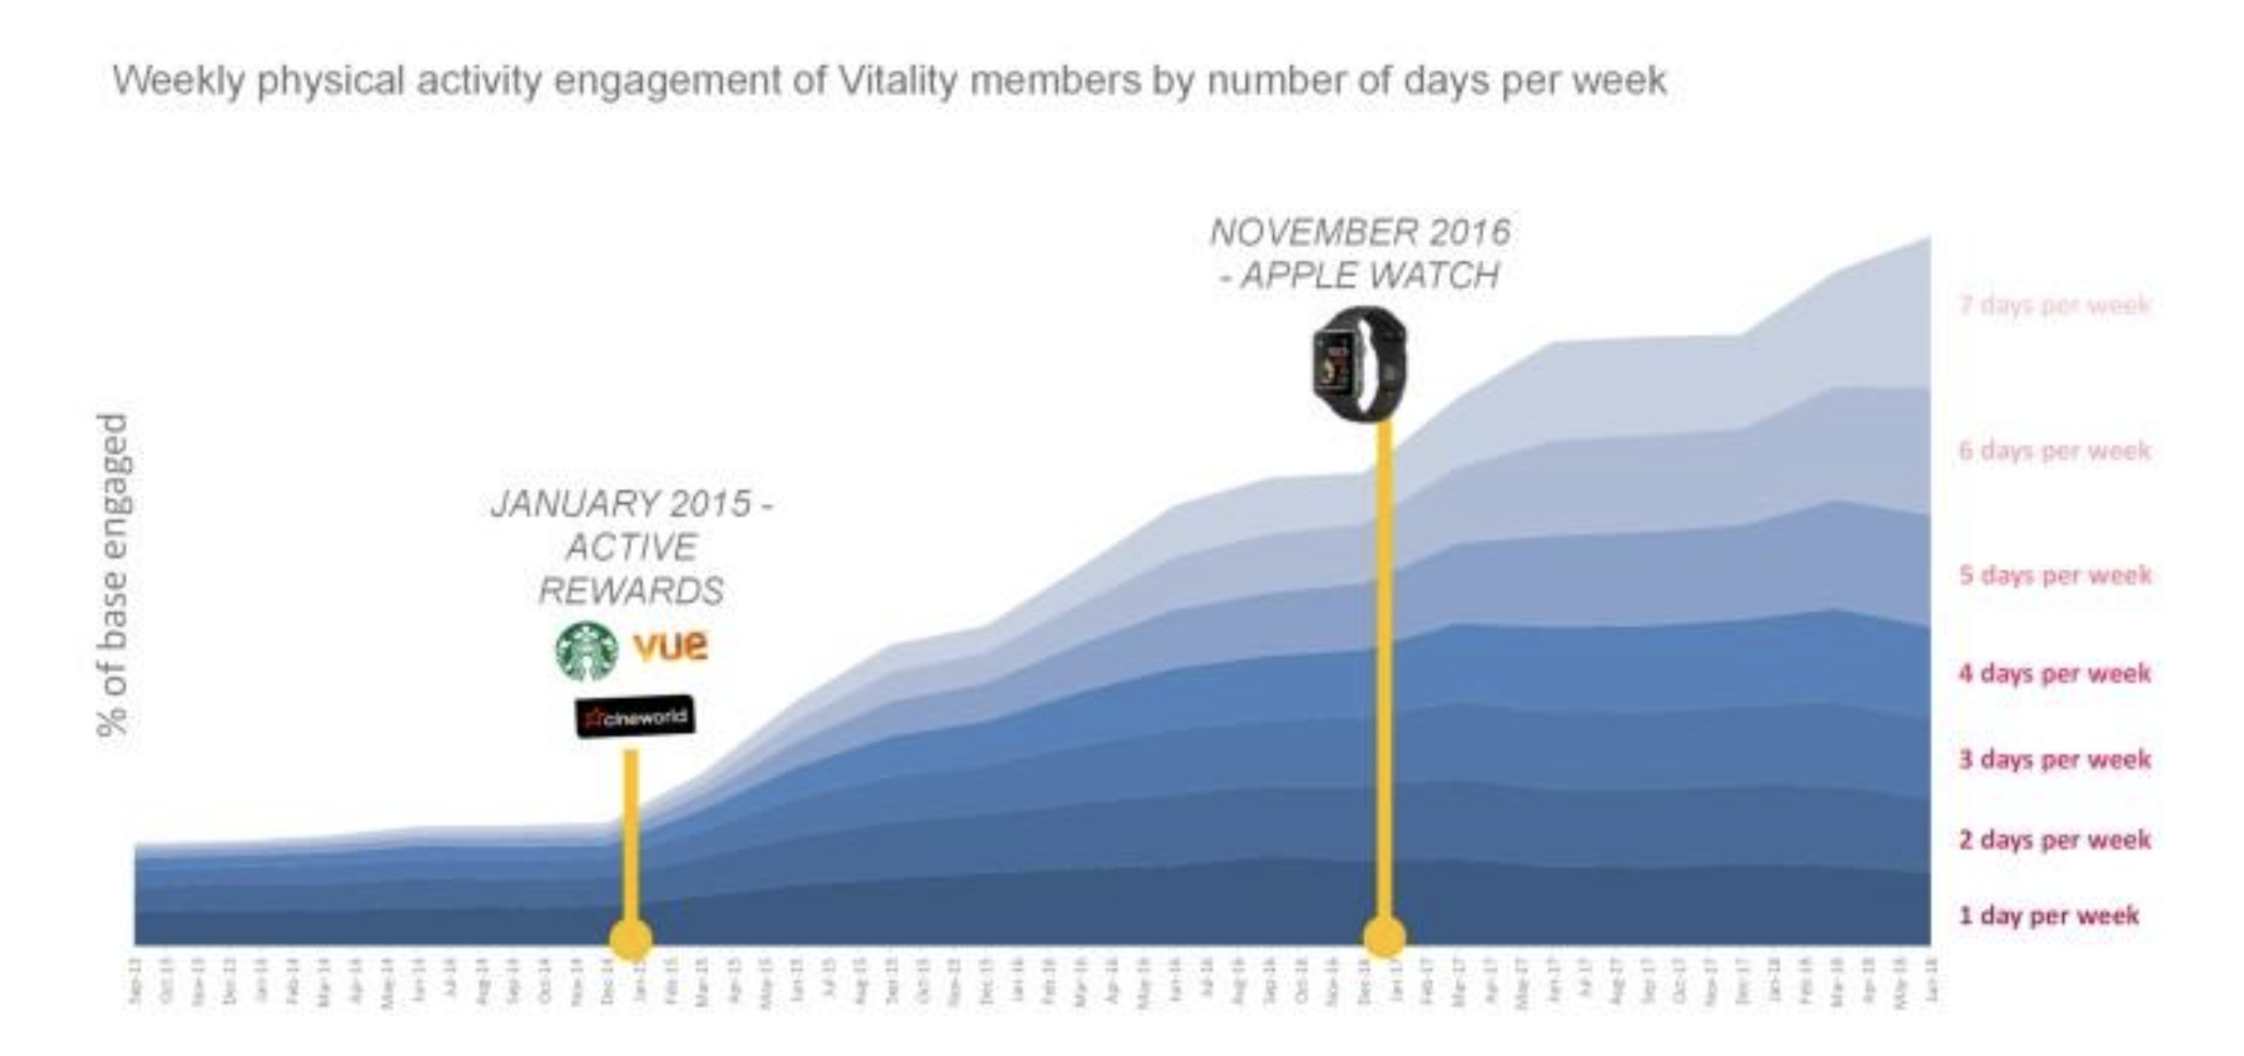 Graph showing weekly physical activity engagement of Vitality members